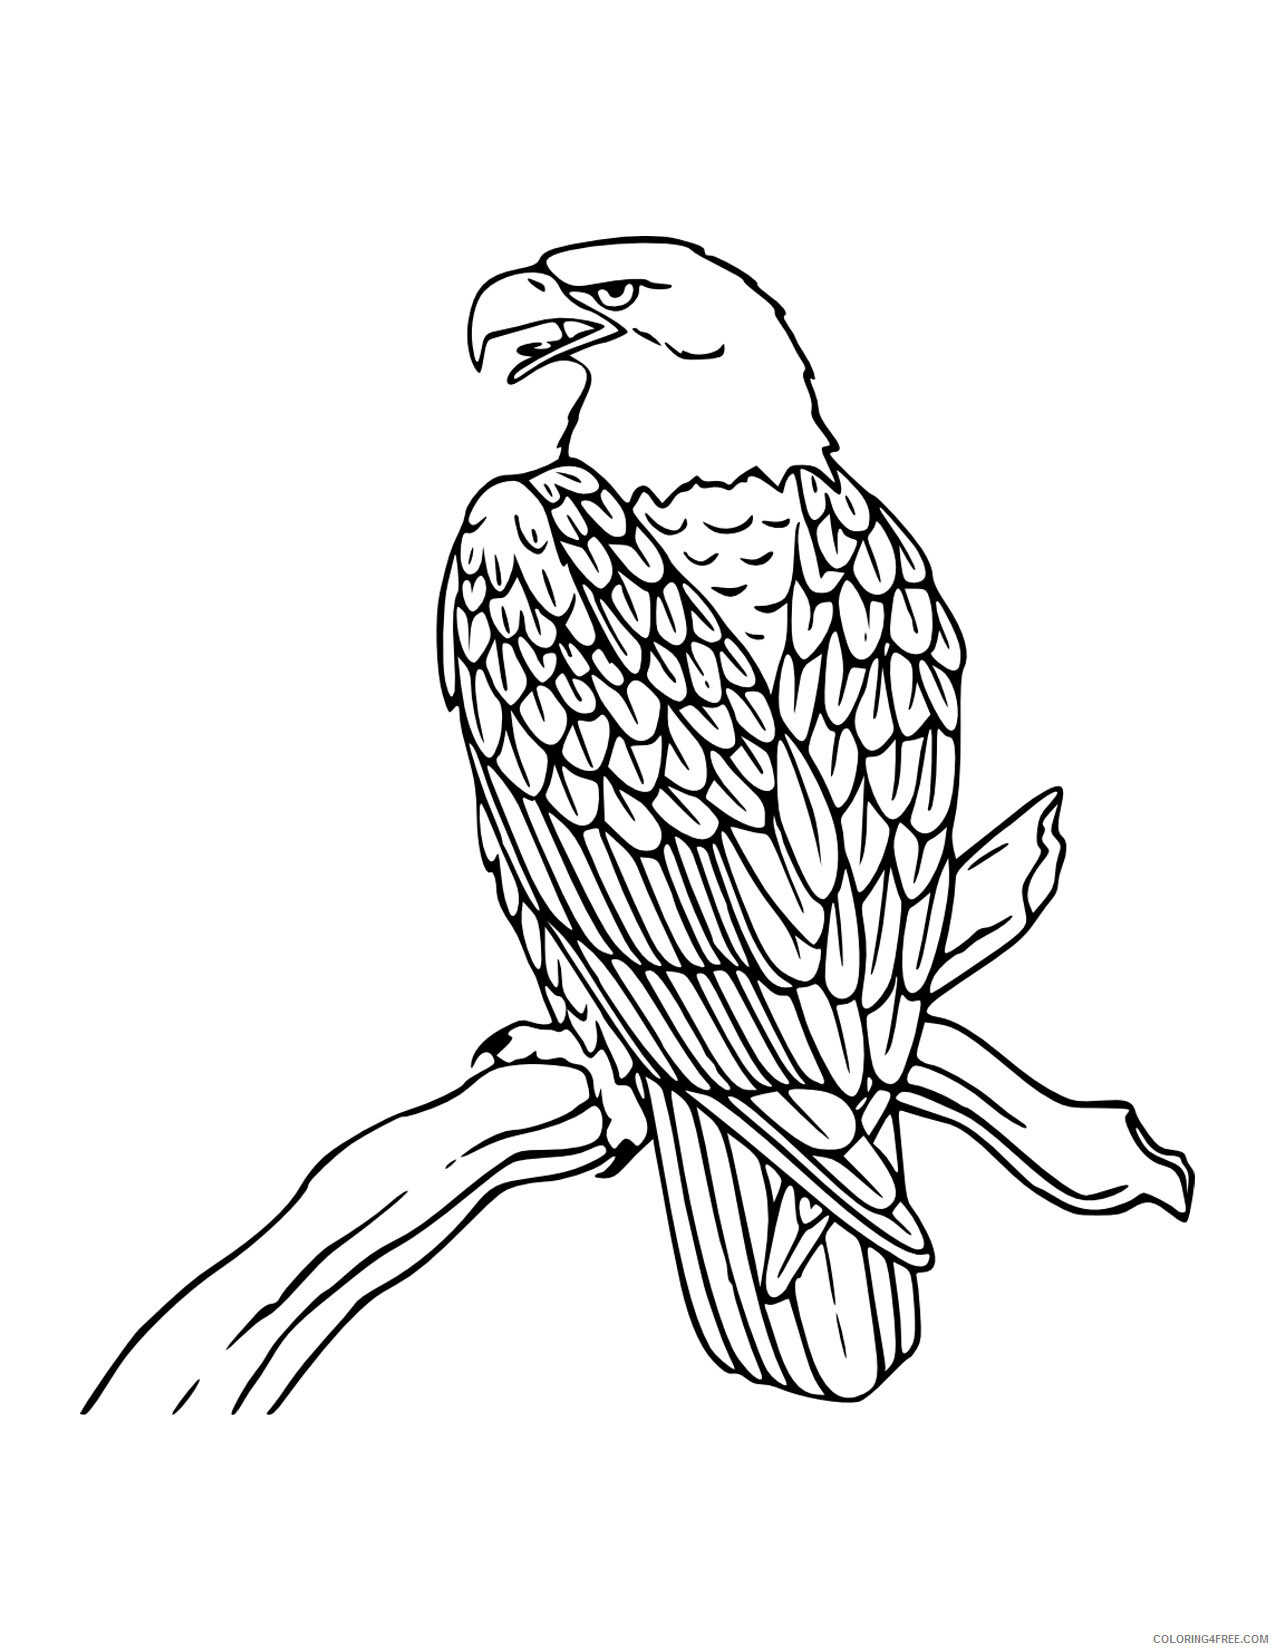 Bald Eagle Coloring Pages Animal Printable Sheets Bald Eagle For Kids 2021 0163 Coloring4free